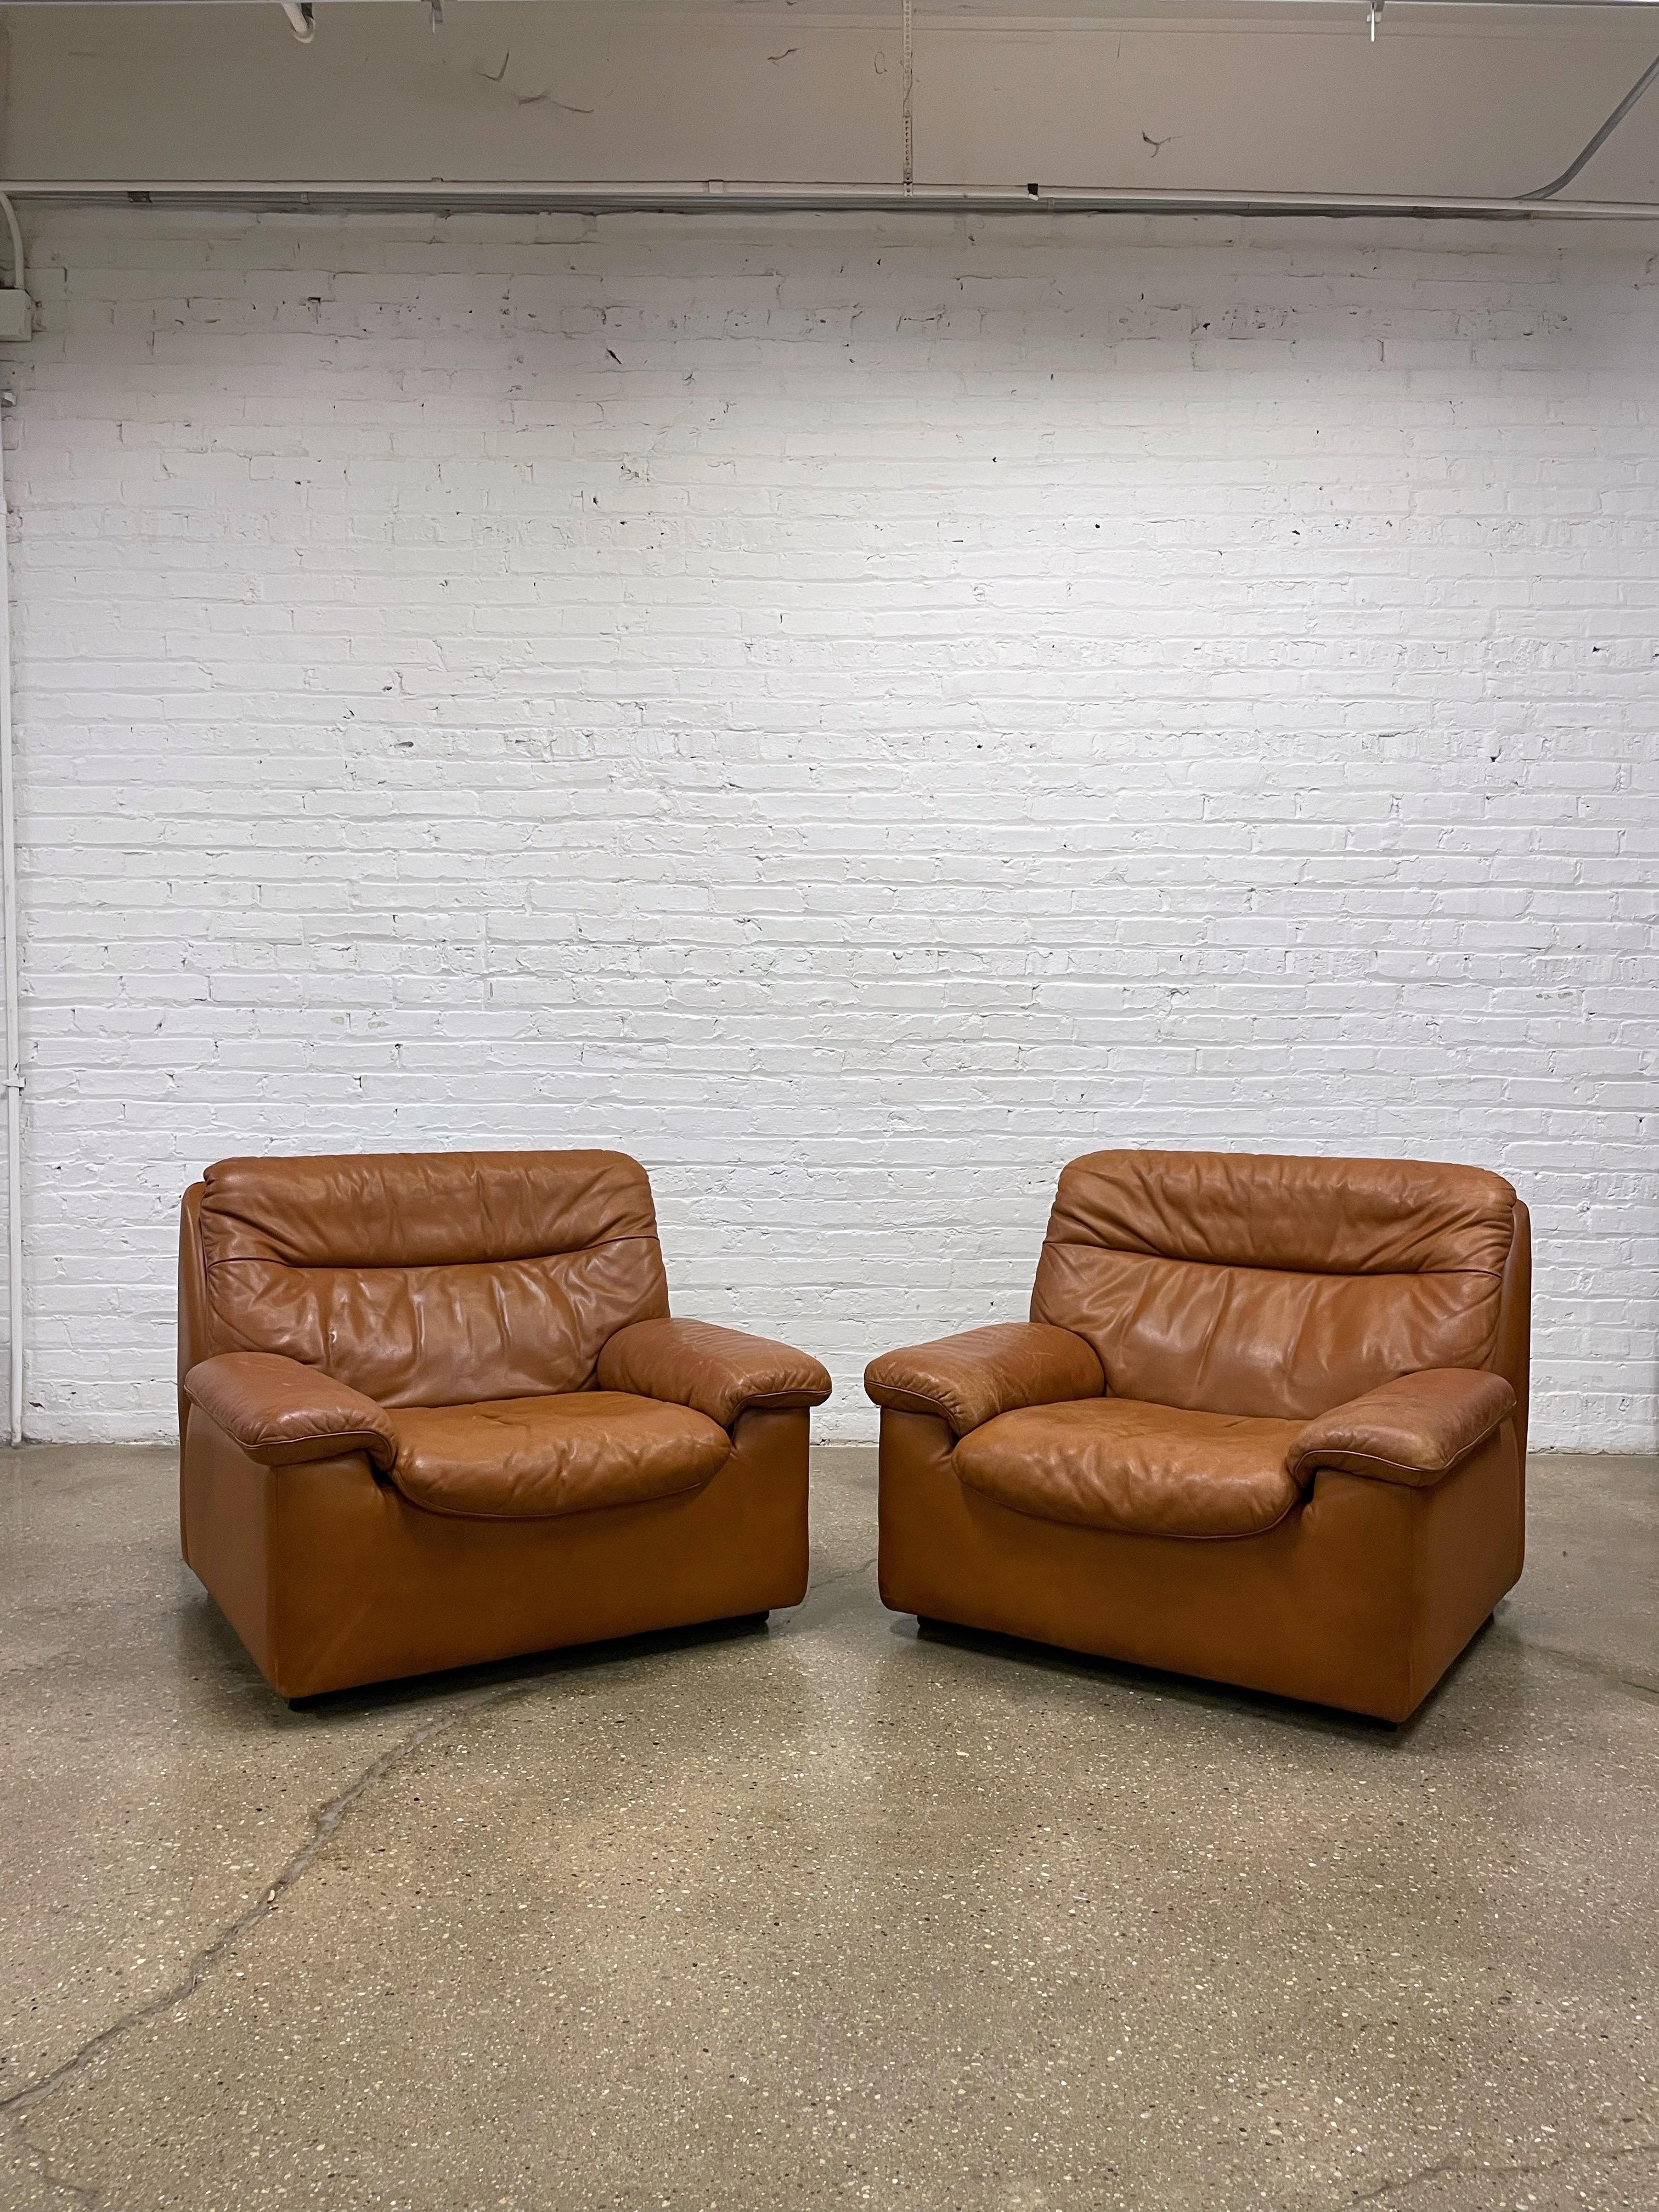 A pair of phenomenal cognac leather lounge chairs by De Sede, made in Switzerland.